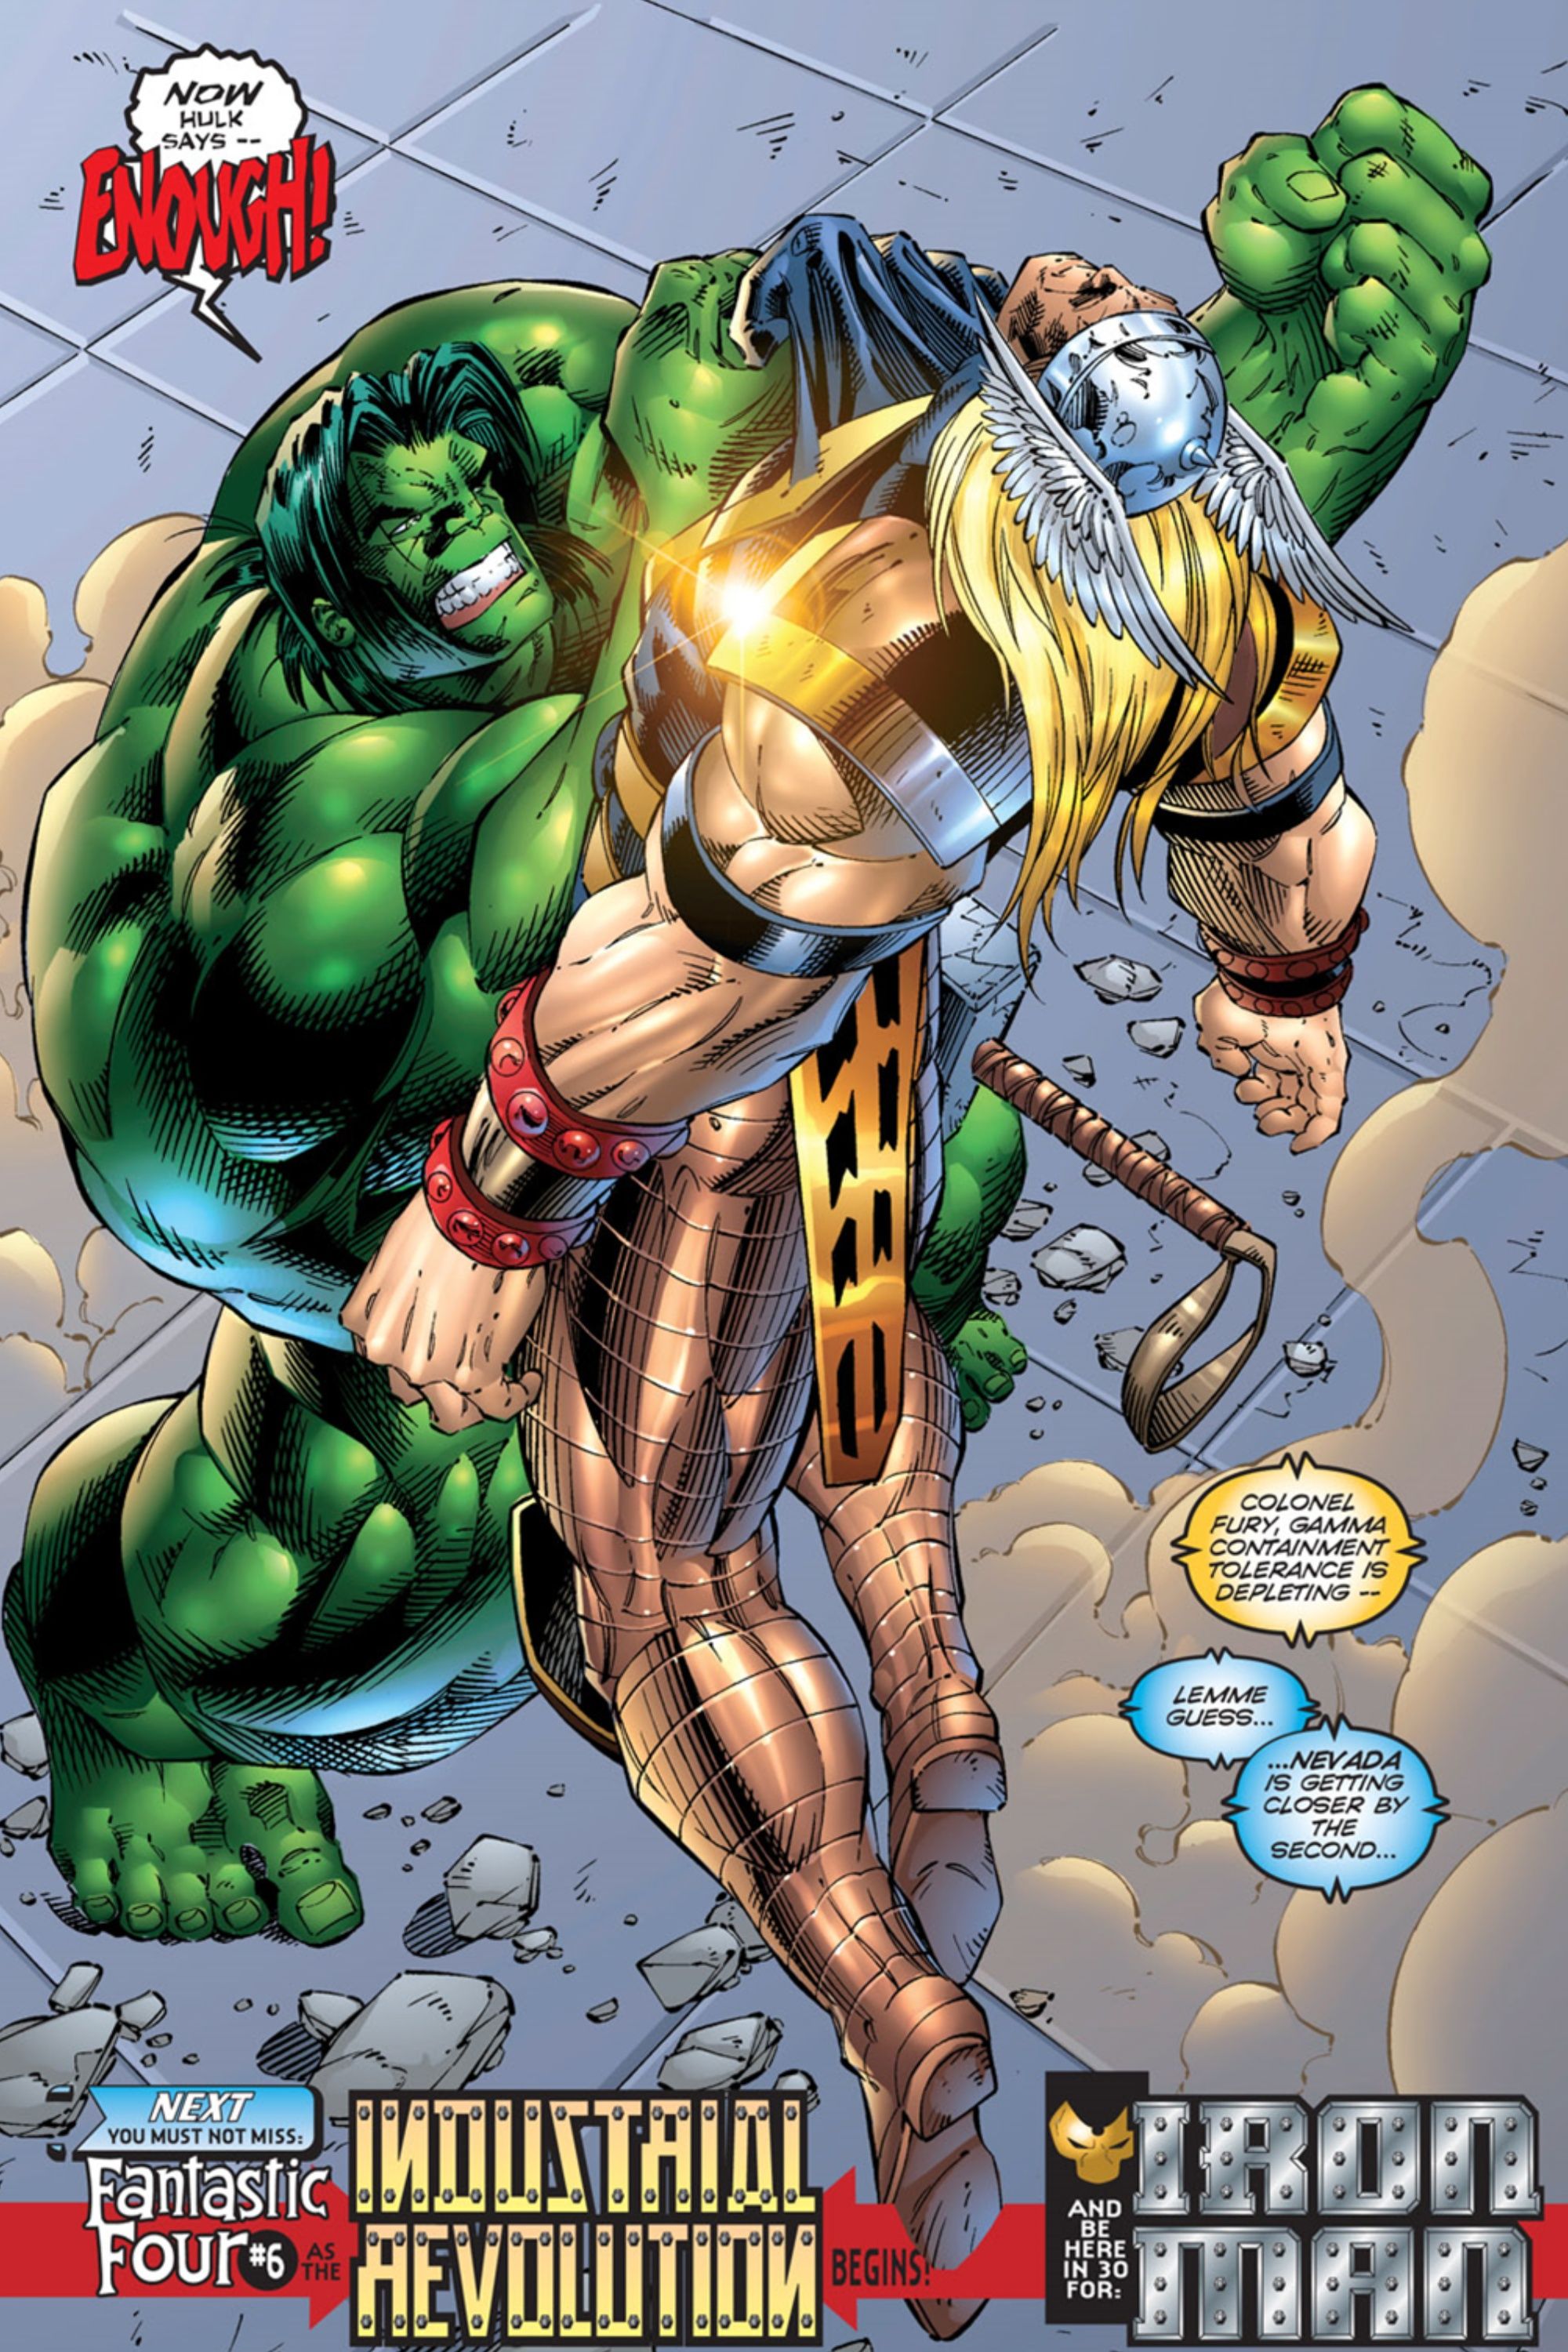 Hulk punching Thor mid-air in a Rob liefeld drawn cover.